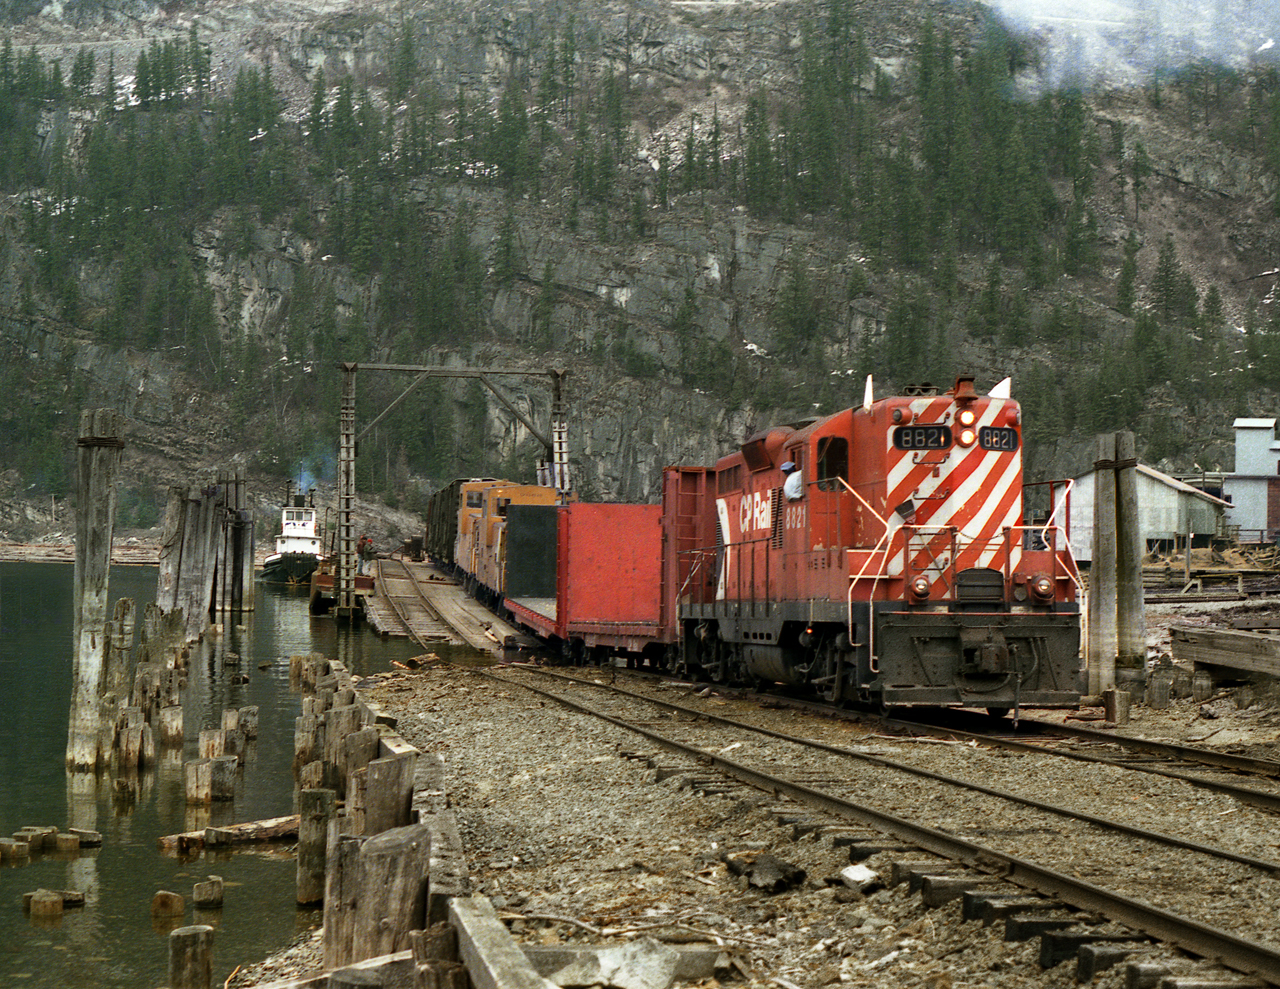 GP9 8821 loads the barge for Rosebery and the isolated Kaslo Subdivision. The modified(For high water) 8821 and crew will board the barge to continue the run to Nakusp. Tug "Iris G" is operated by a contractor.